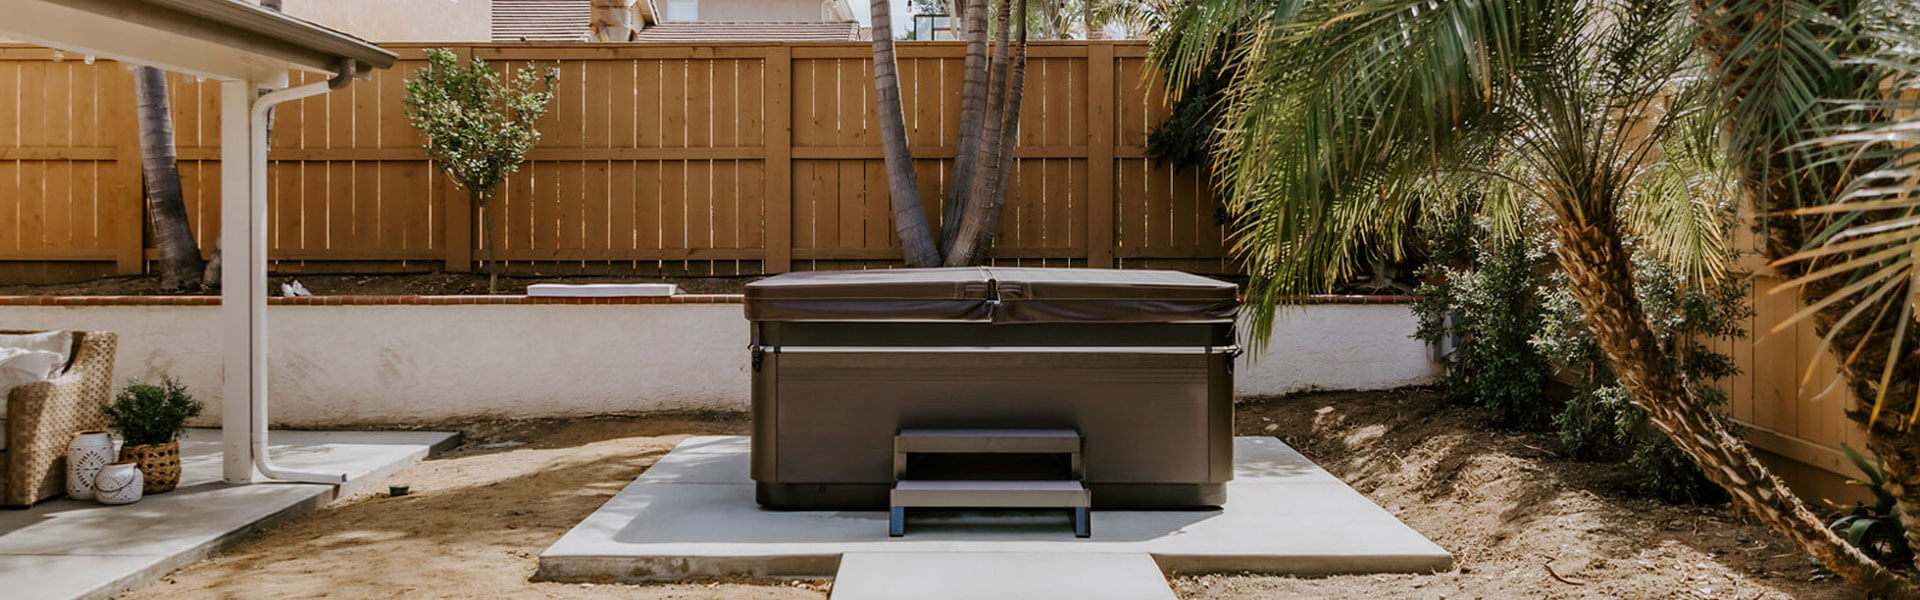 So, You Ordered a Hot Tub: Now What?